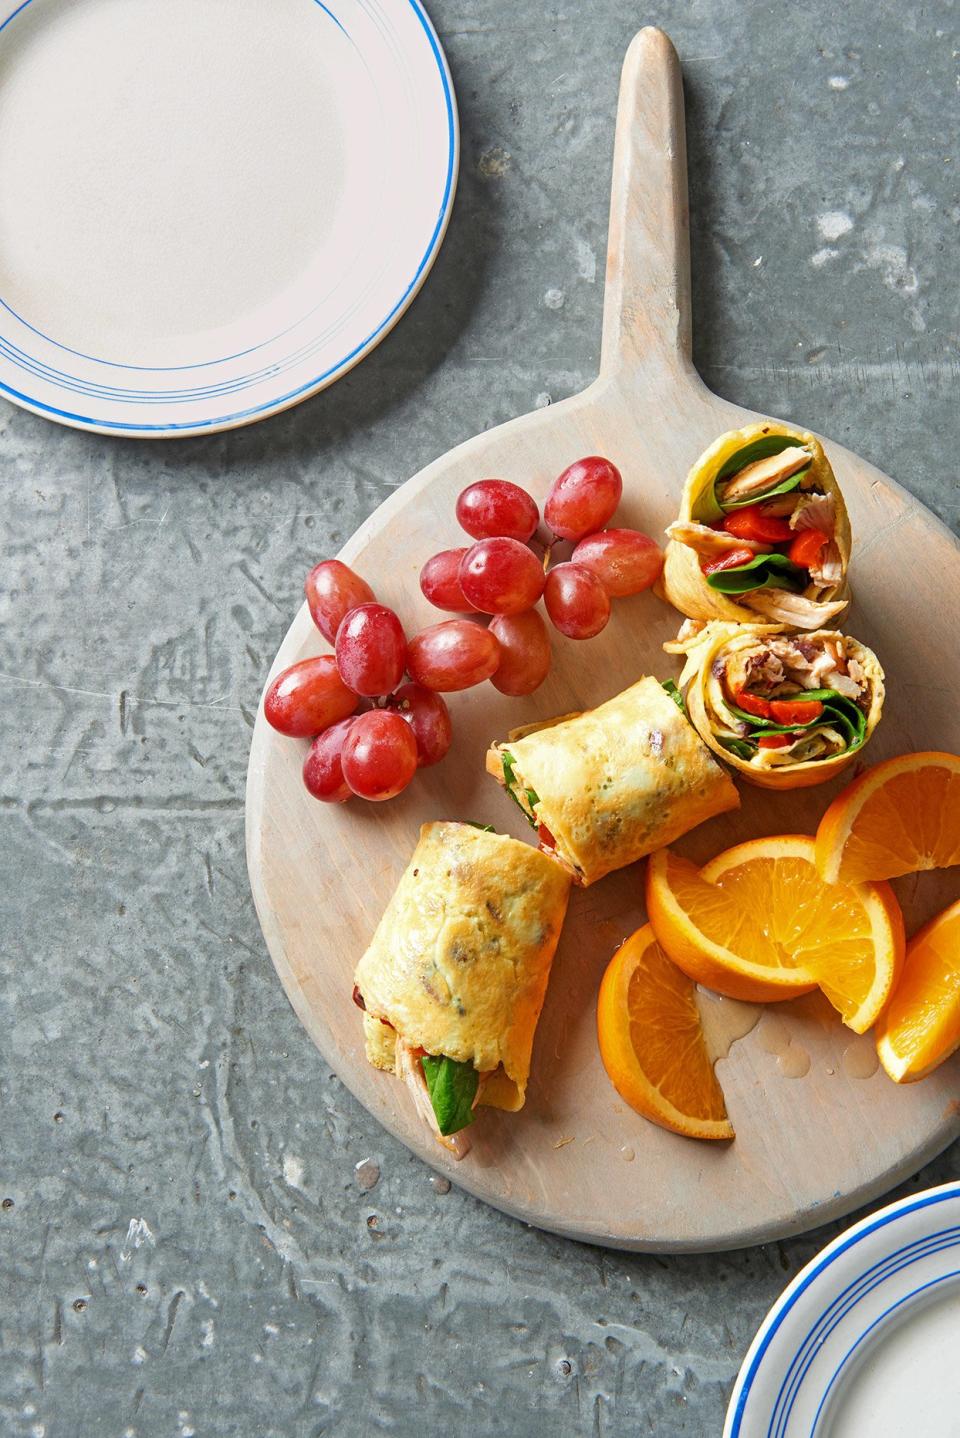 Bust loose from you turkey-sandwich rut right now with our creative wrap recipes! Here, you’ll find your next favorite beef, pork, or chicken wrap recipe, plus tuna and veggie wrap recipes, too. But before you unwrap your midday masterpiece, better copy this link: The colorful combo might create lunch envy among your coworkers, so be prepared to share these clever lunch wrap ideas with everyone.